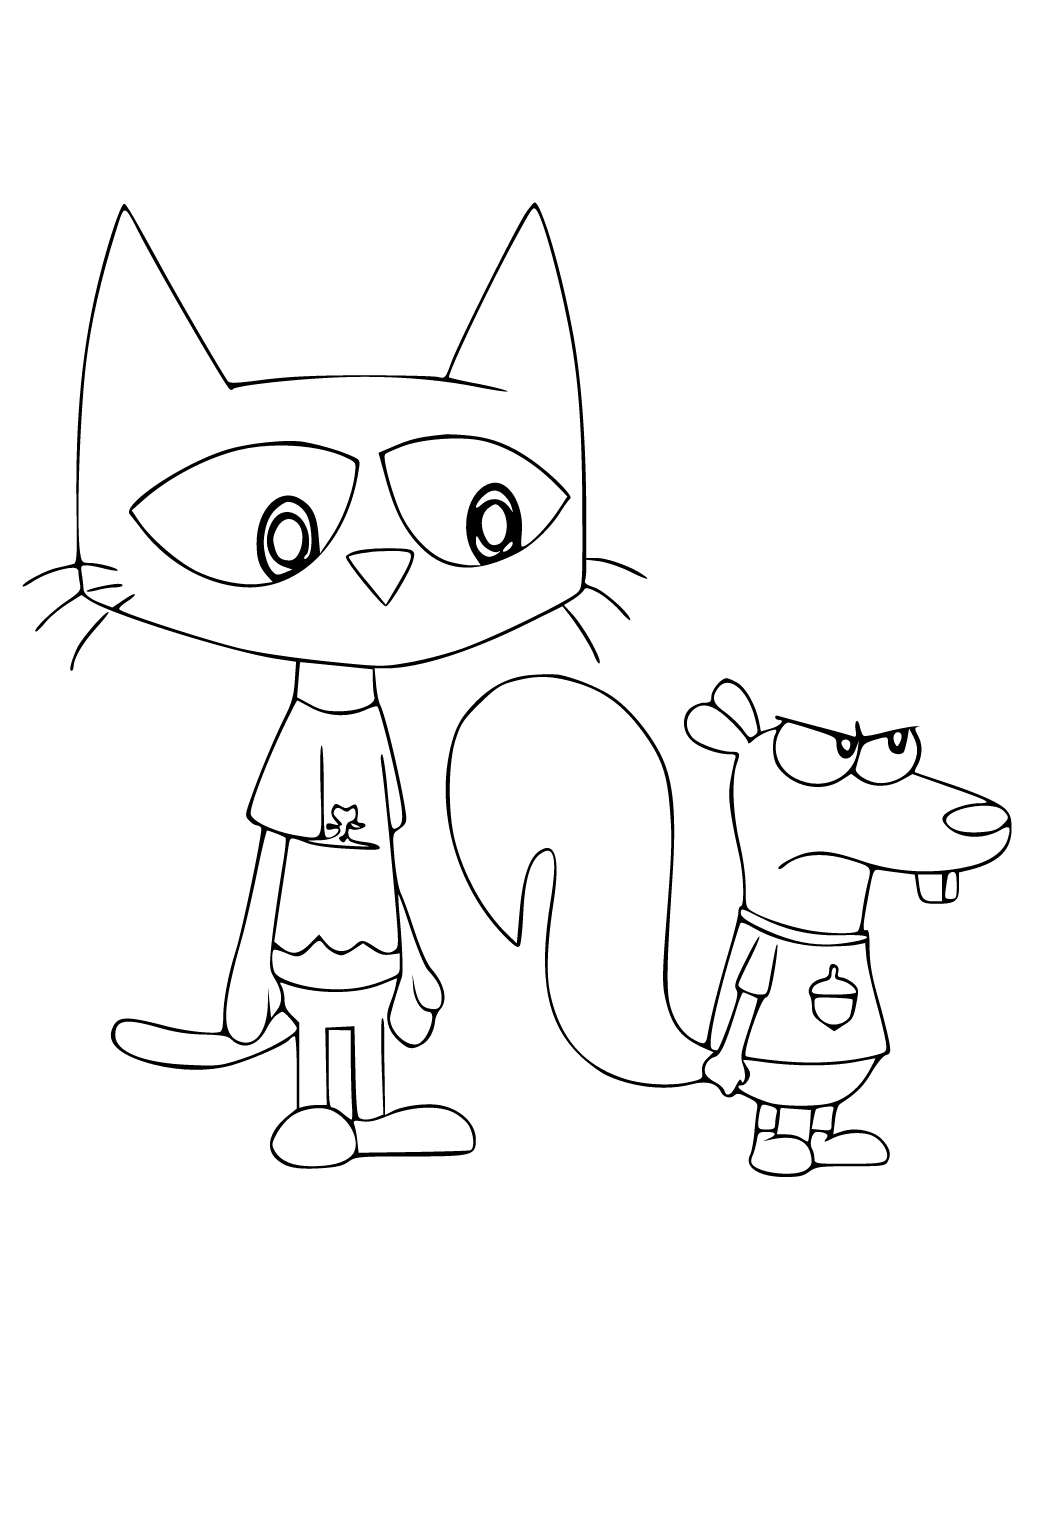 Free printable pete the cat squirrel coloring page for adults and kids